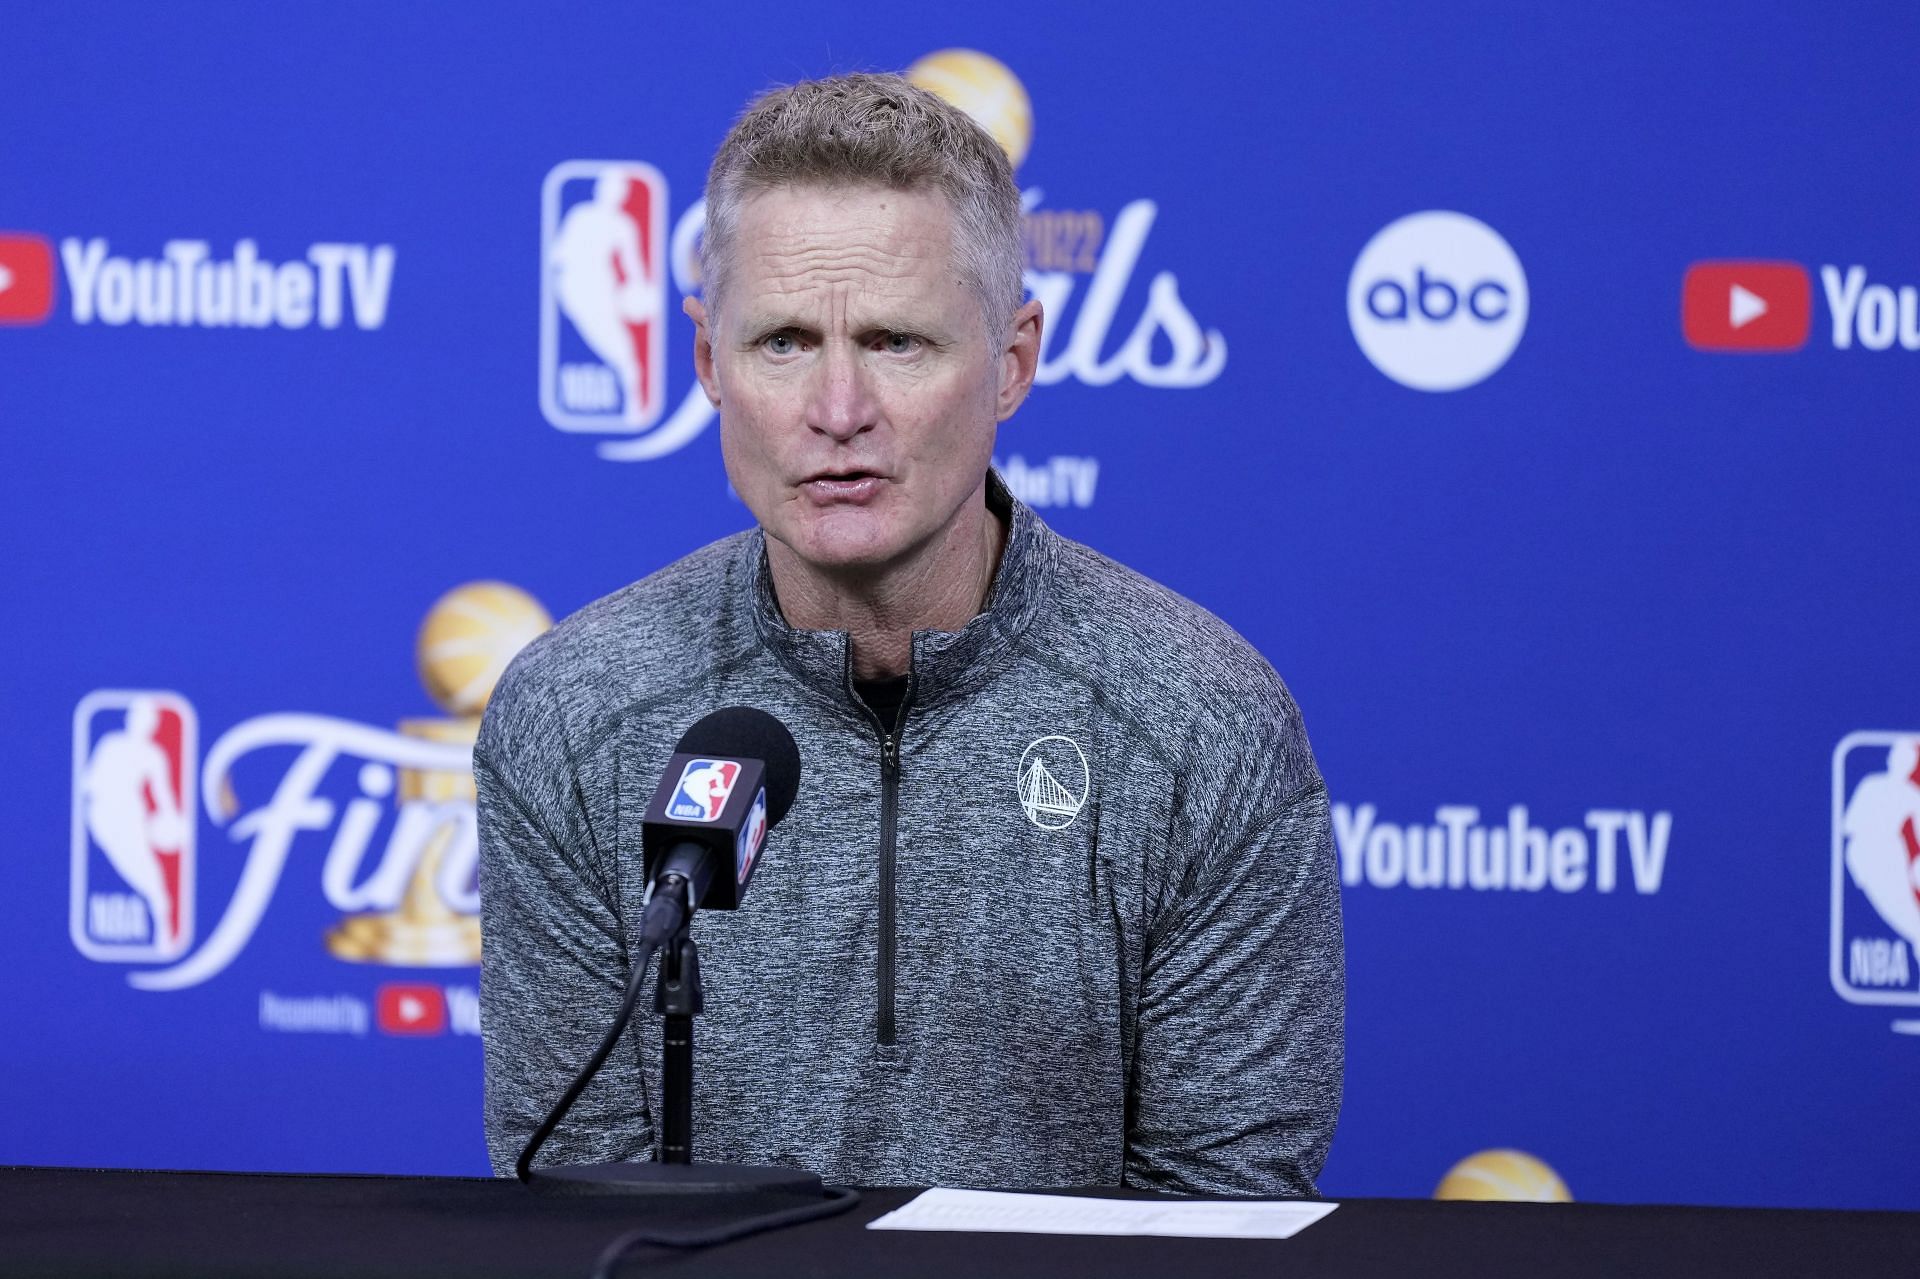 Golden State Warriors coach Steve Kerr talks during a news conference after a 104-94 win against the Boston Celtics in Game 5 of the NBA Finals at Chase Center on Monday in San Francisco, California.